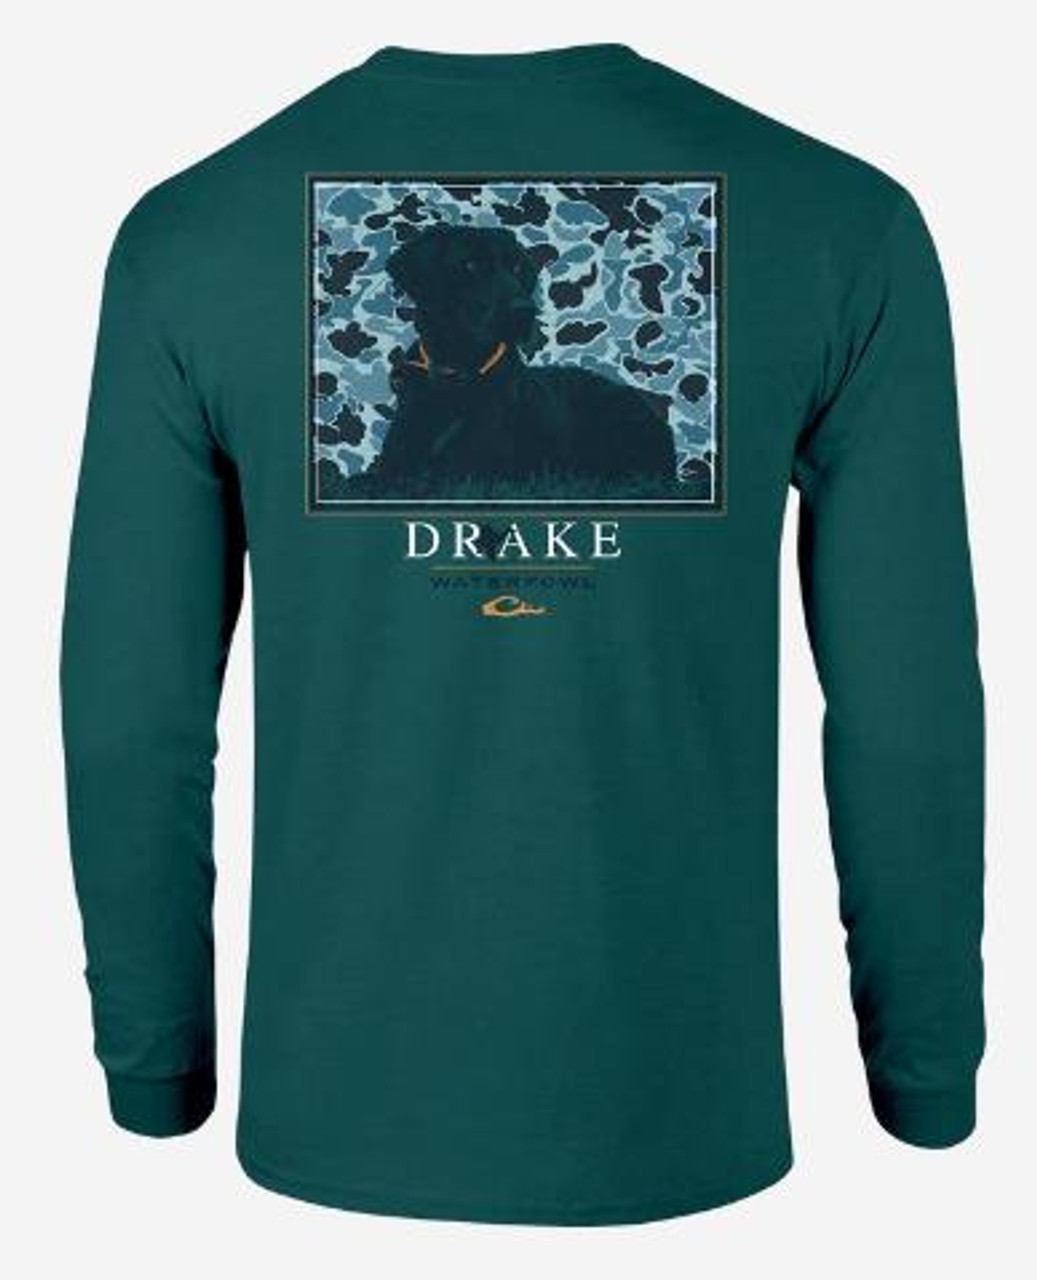 Drake Graphic Tee  Collection Of Unique Products